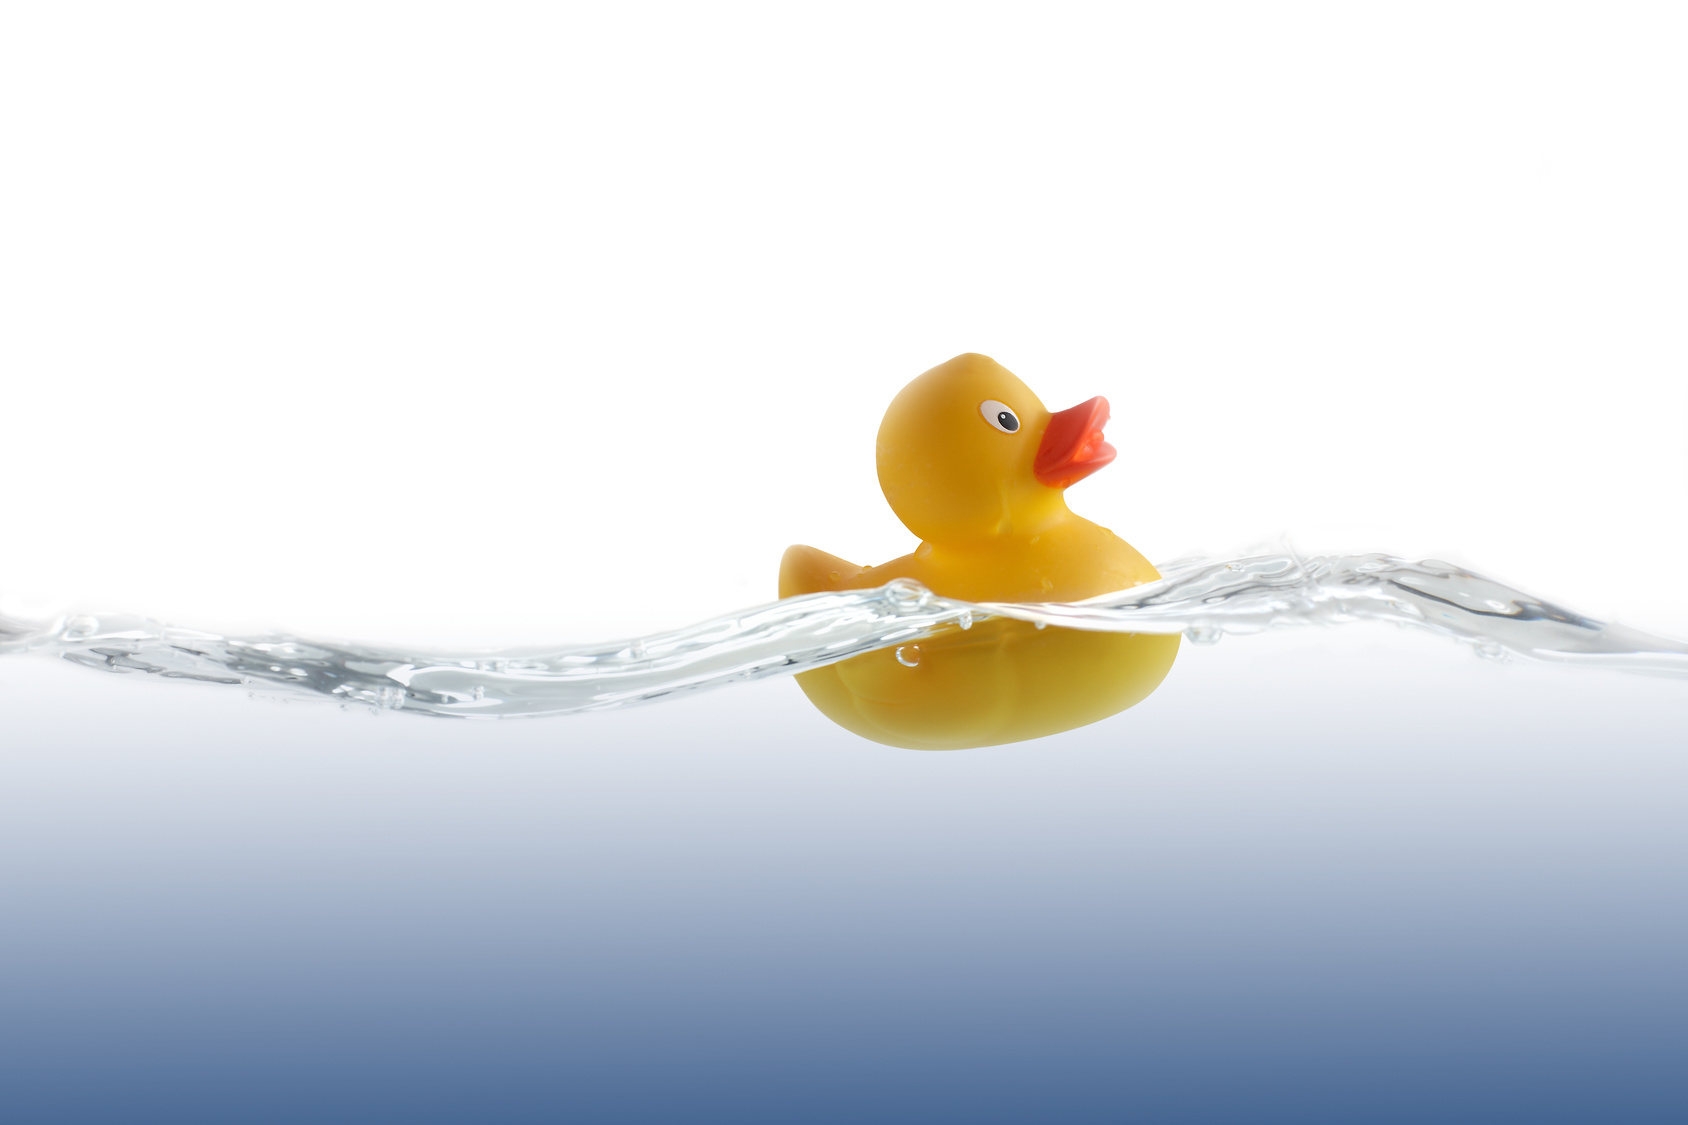 Rotary's Rubber Ducky Derby on April 26th